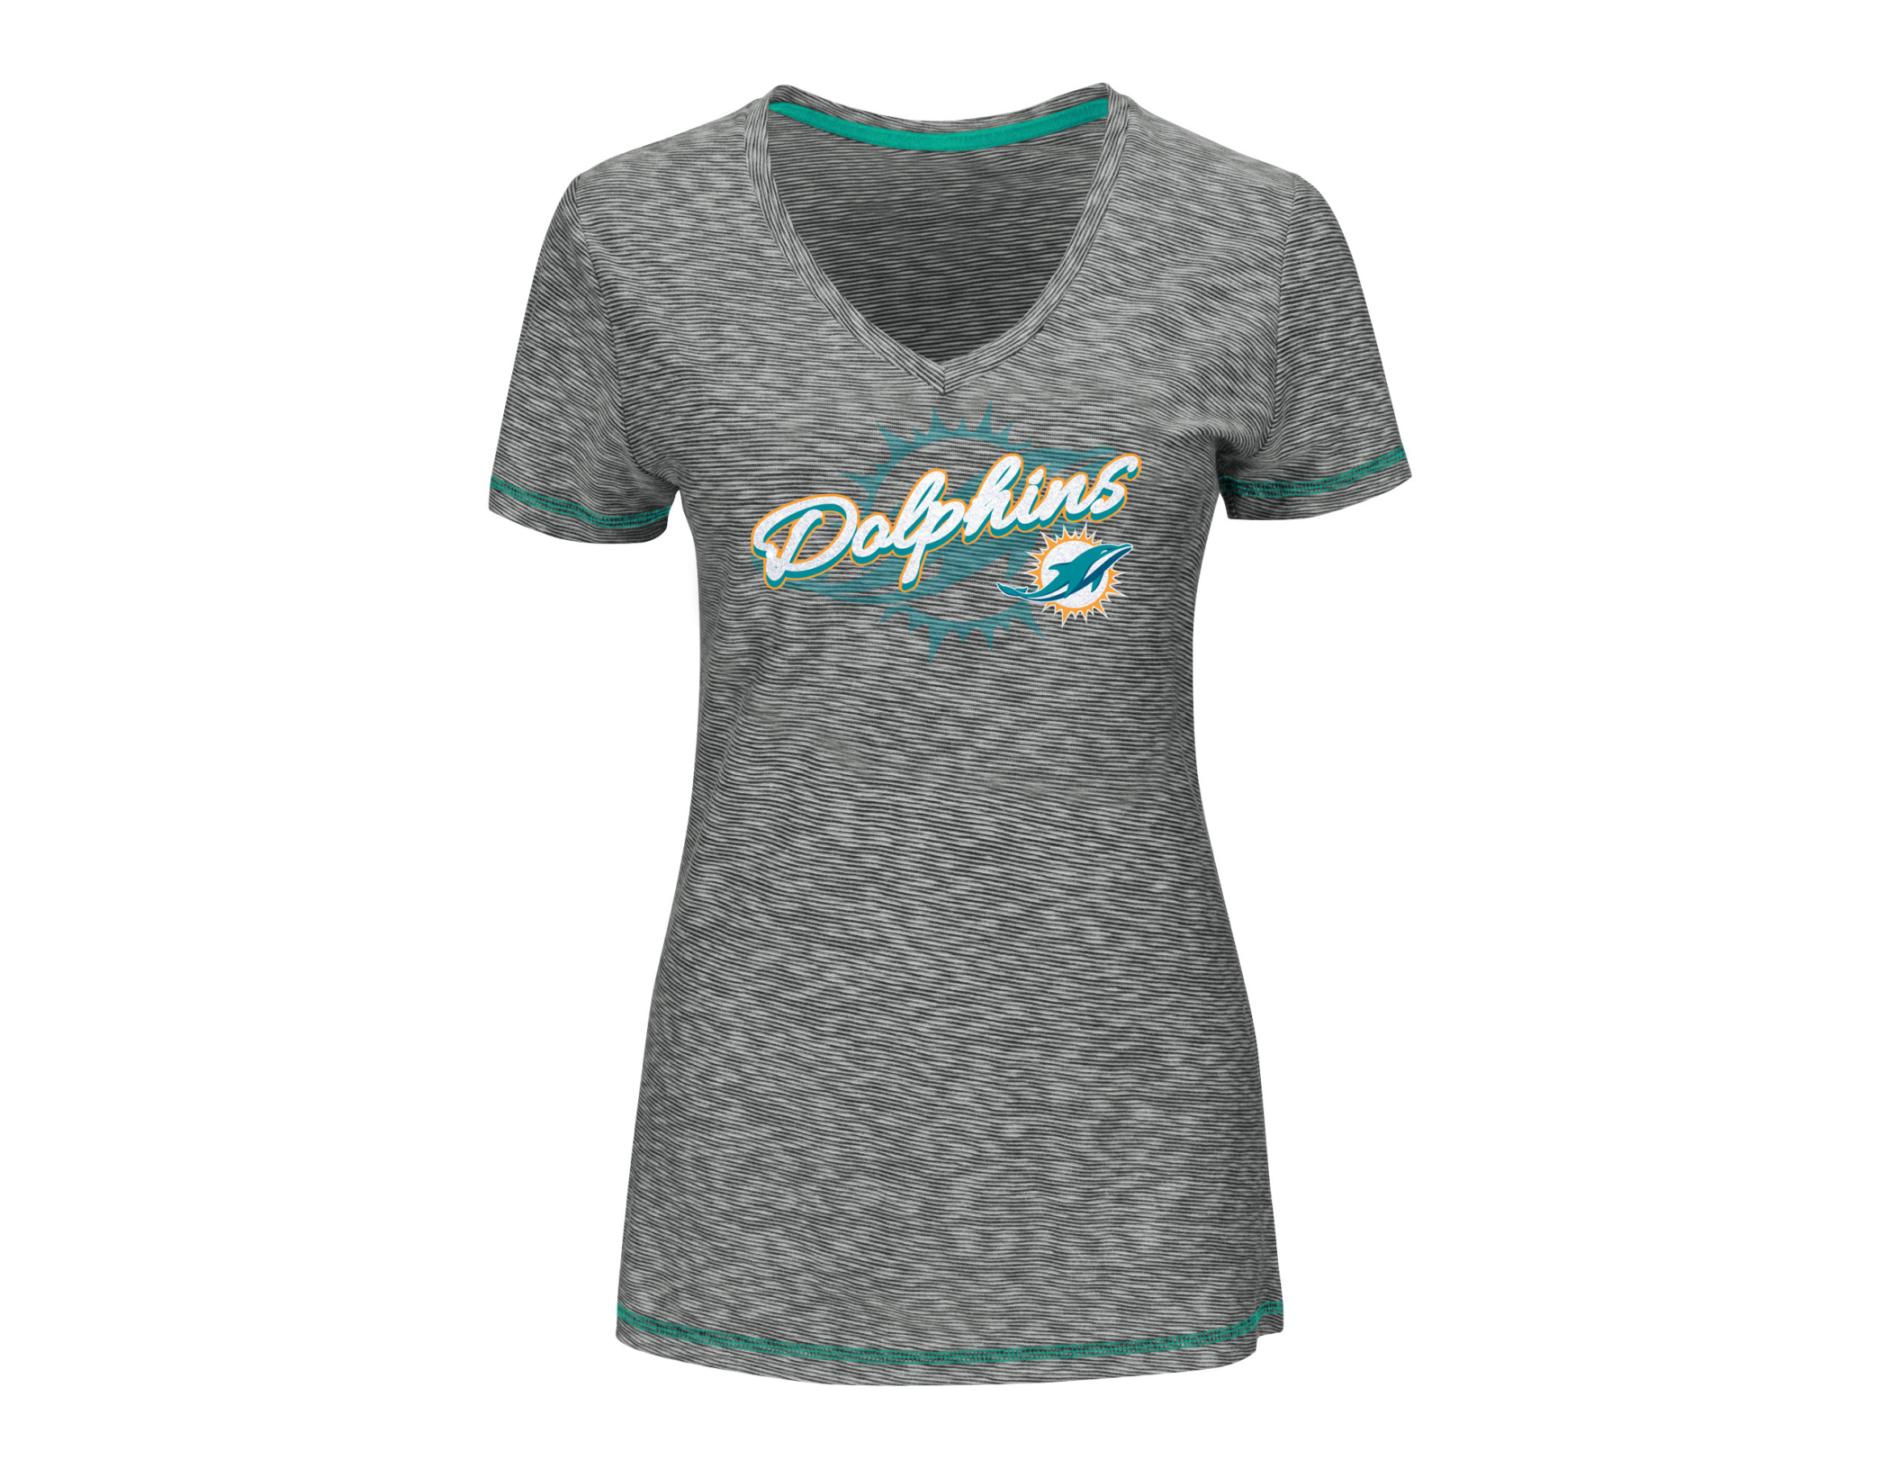 NFL Women's Ribbed Graphic T-Shirt - Miami Dolphins